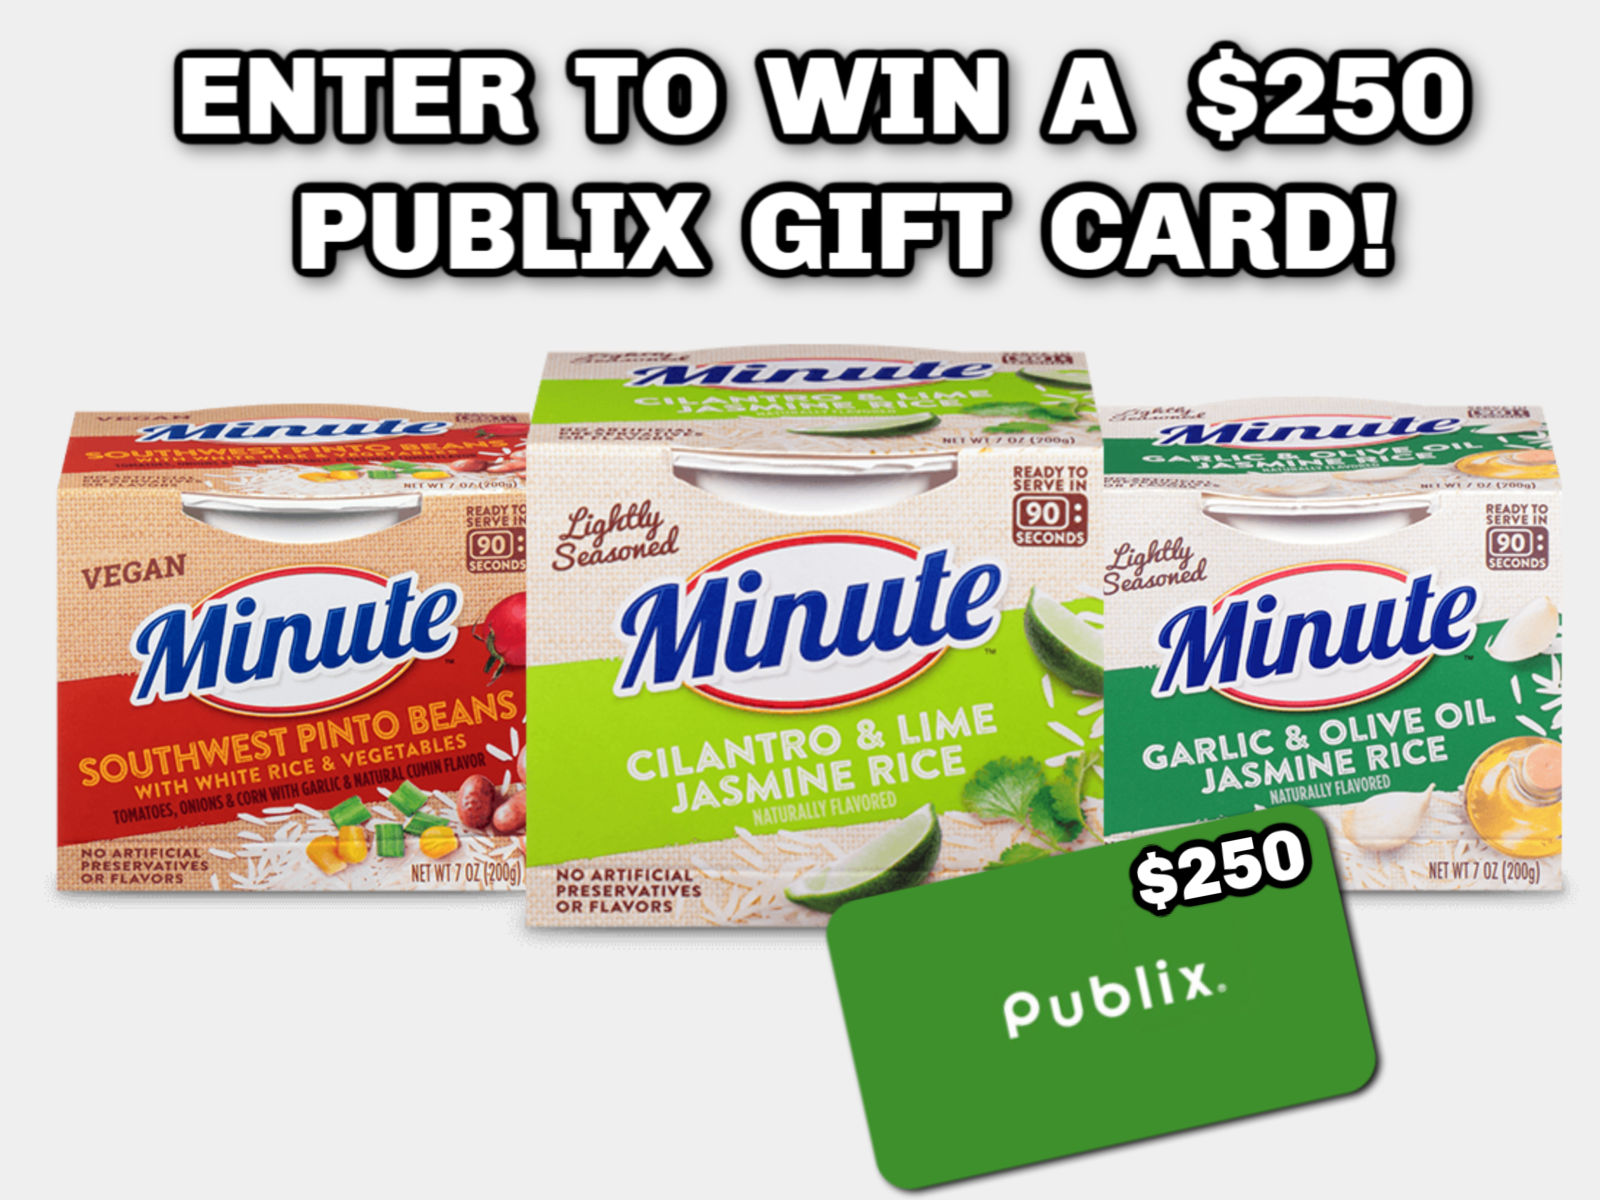 Grab Savings On Minute Rice At Publix - Try New Minute Ready To Serve & Save! on I Heart Publix 2